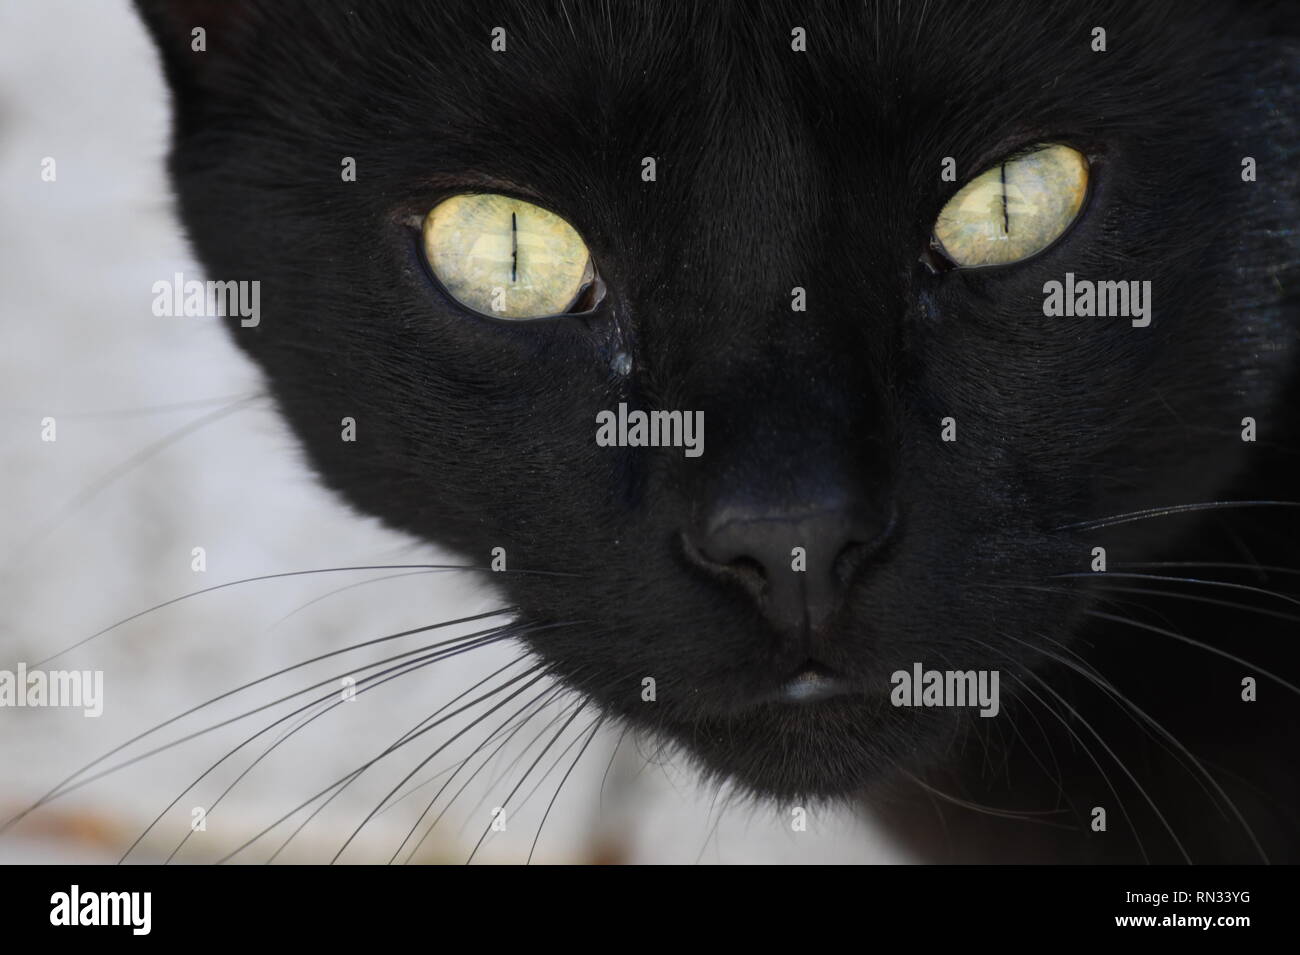 face of a mysterious black cat with green eyes seeking proximity Stock Photo